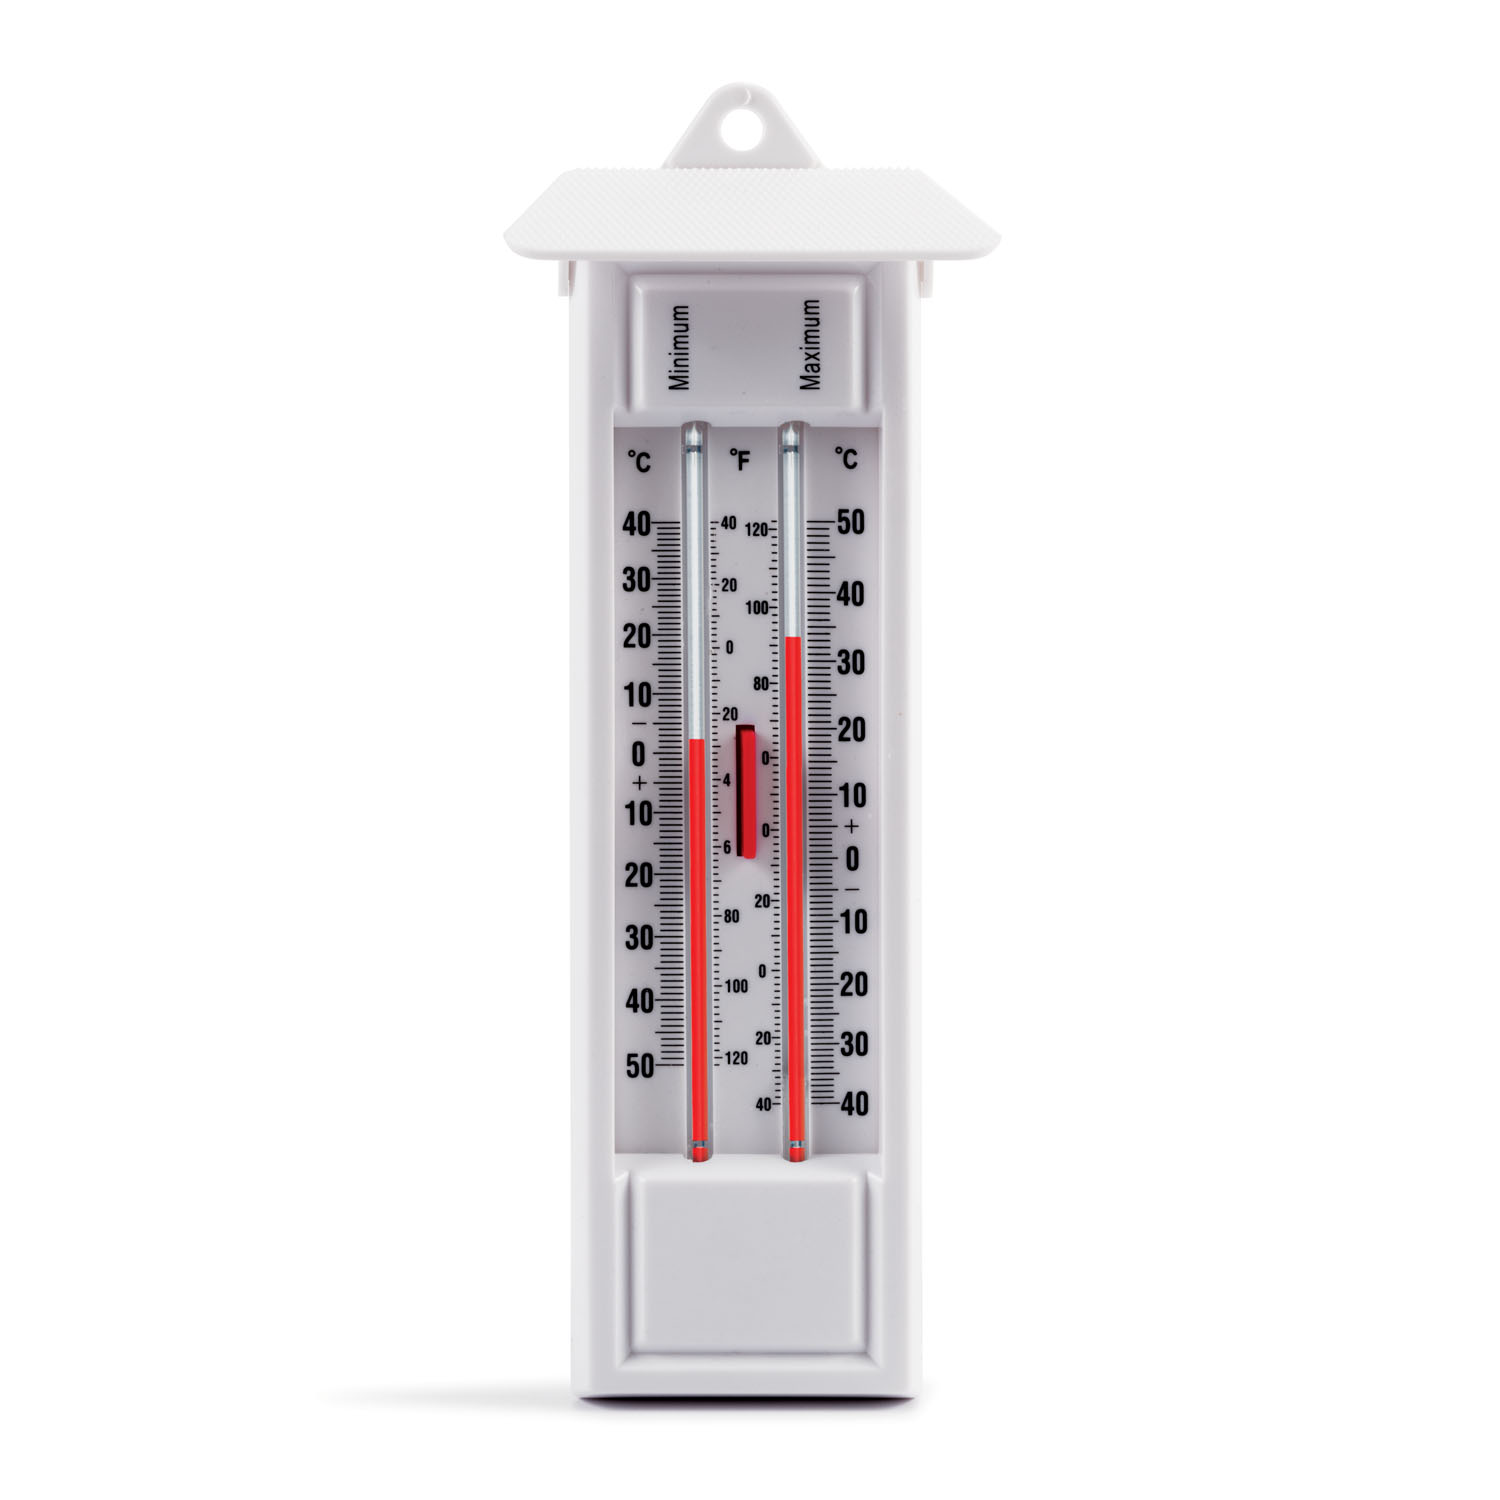 Min/Max Thermometer, Wildlife Management Supplies